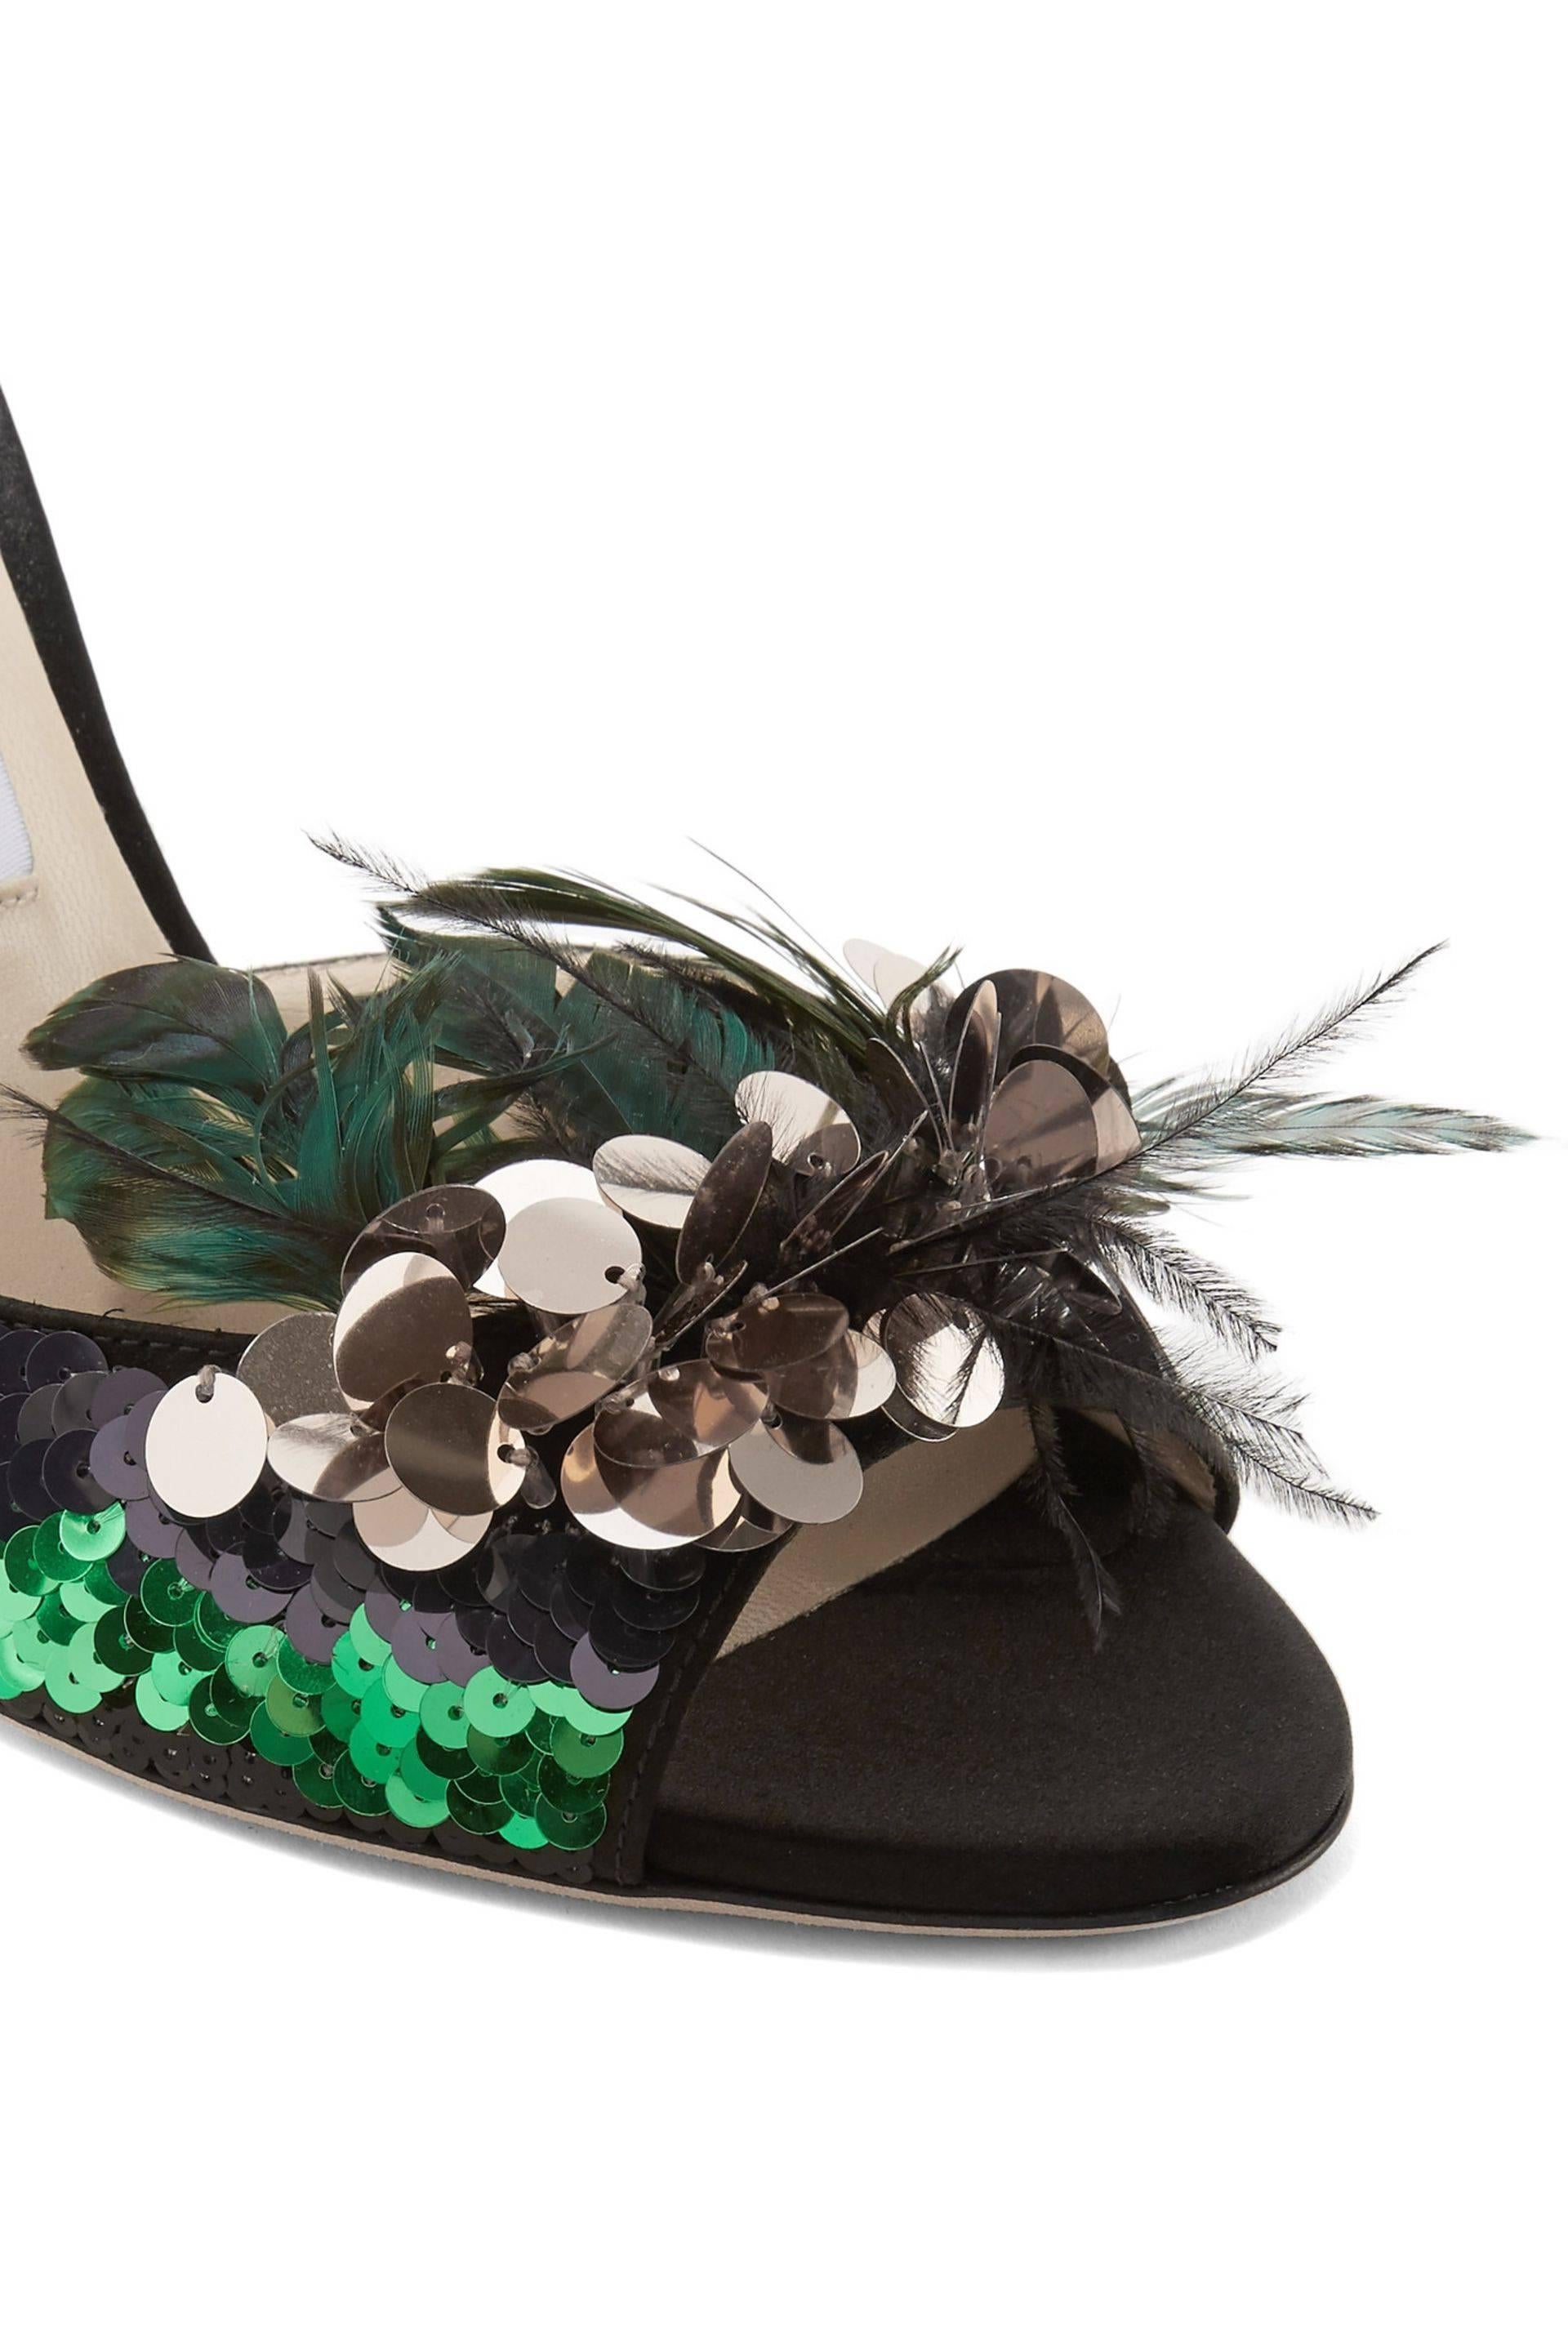 Jimmy Choo New Black Green Ostrich Sequin Evening Sandals Heels in Box

Size IT 36
Satin
Ostrich
Sequin
Ankle buckle closure
Made in Italy
Heel height 4"
Includes original Jimmy Choo box